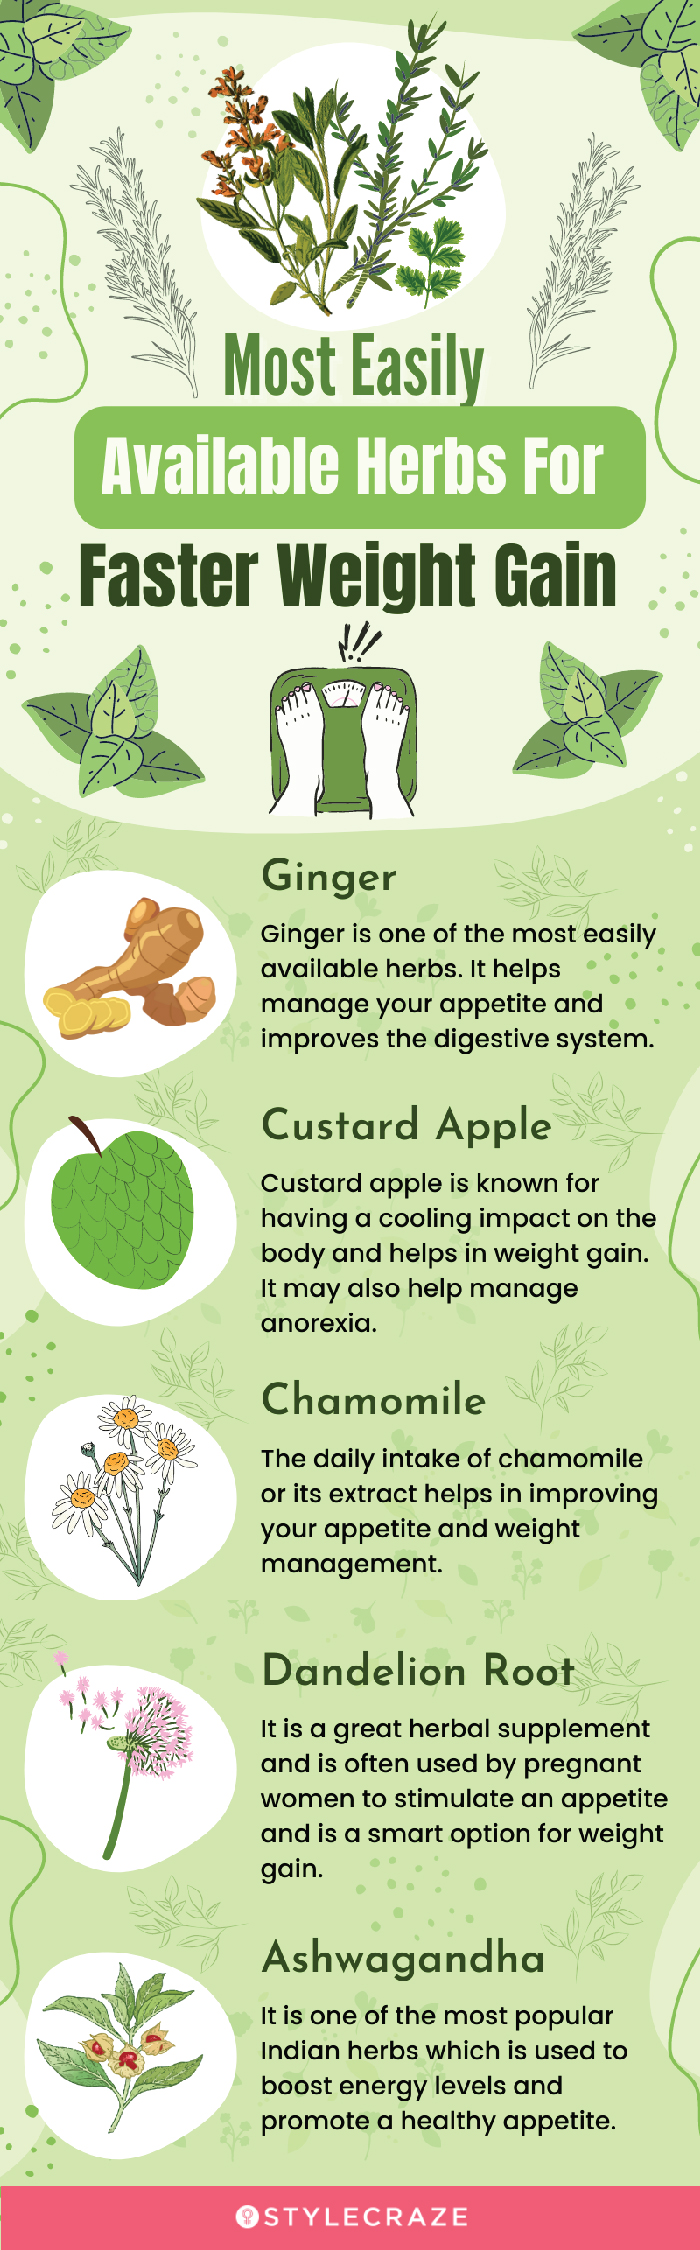 most easily available herbs for faster weight gain (infographic)